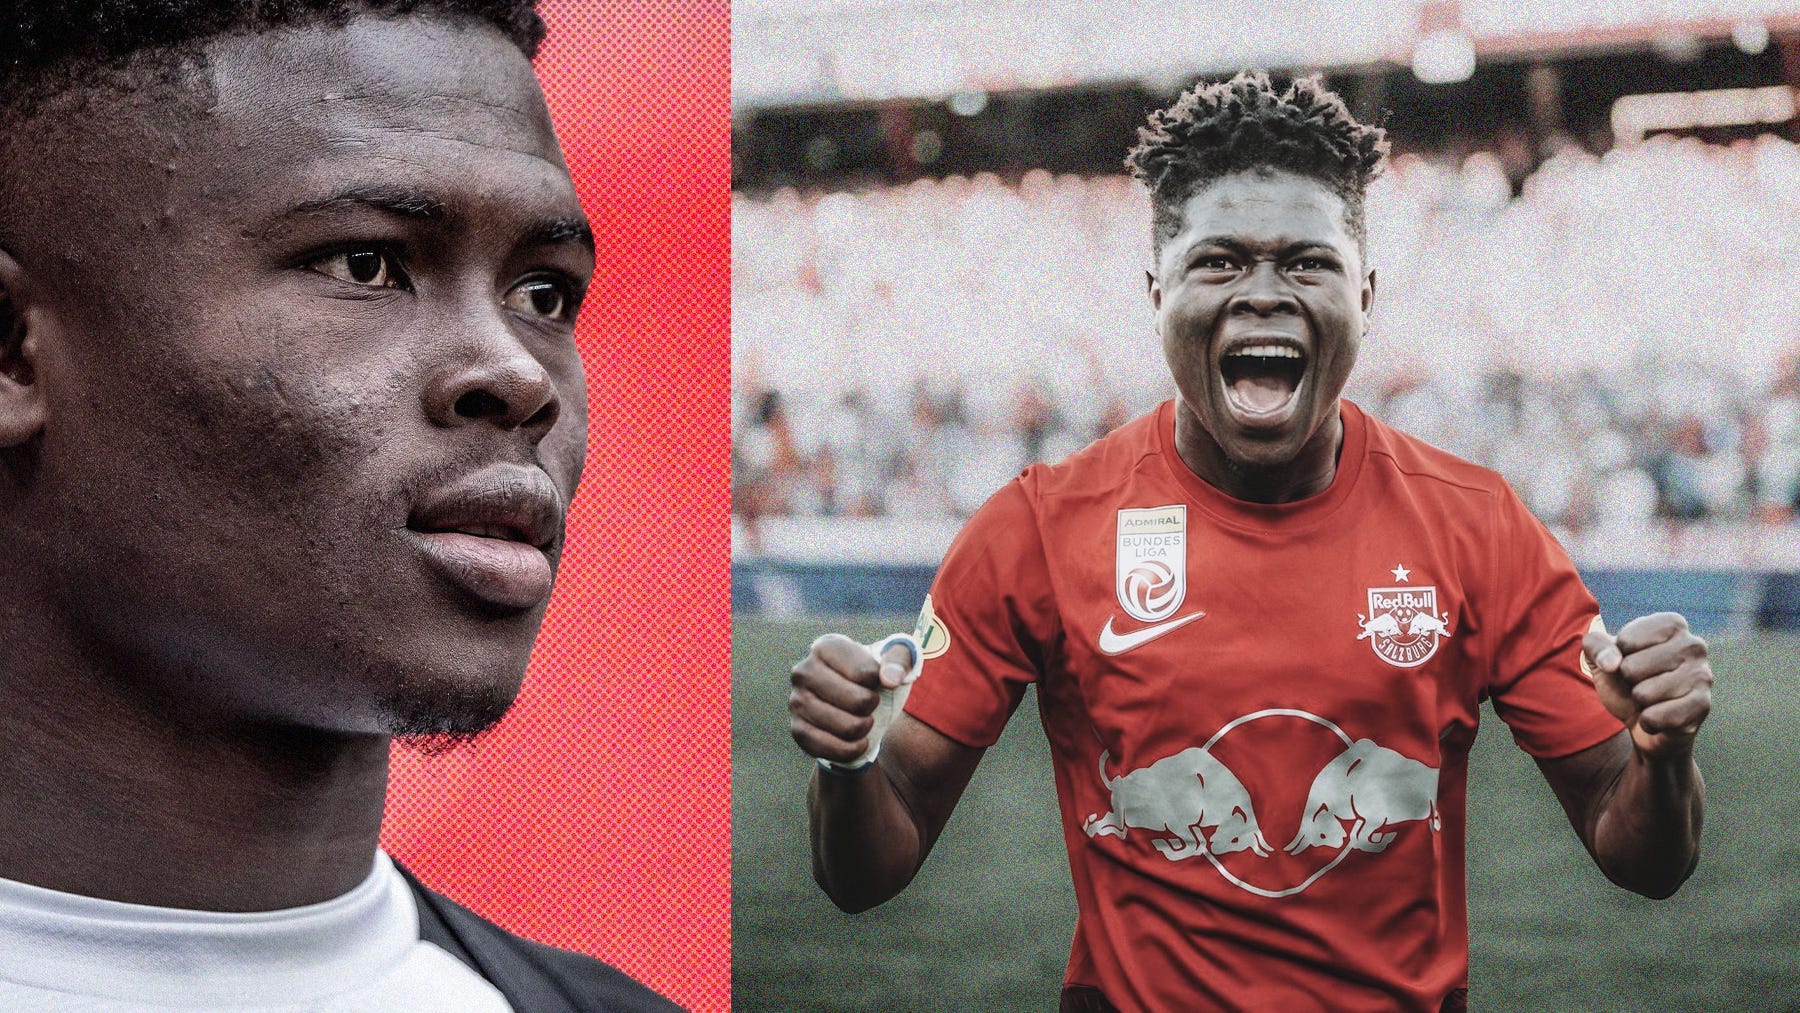 A composite image featuring two photos of Karim Konaté. On the left is a close-up shot of his side profile; on the right is a photo of him celebrating, fists clenched, shouting toward the camera in a red Red Bull Salzburg shirt.